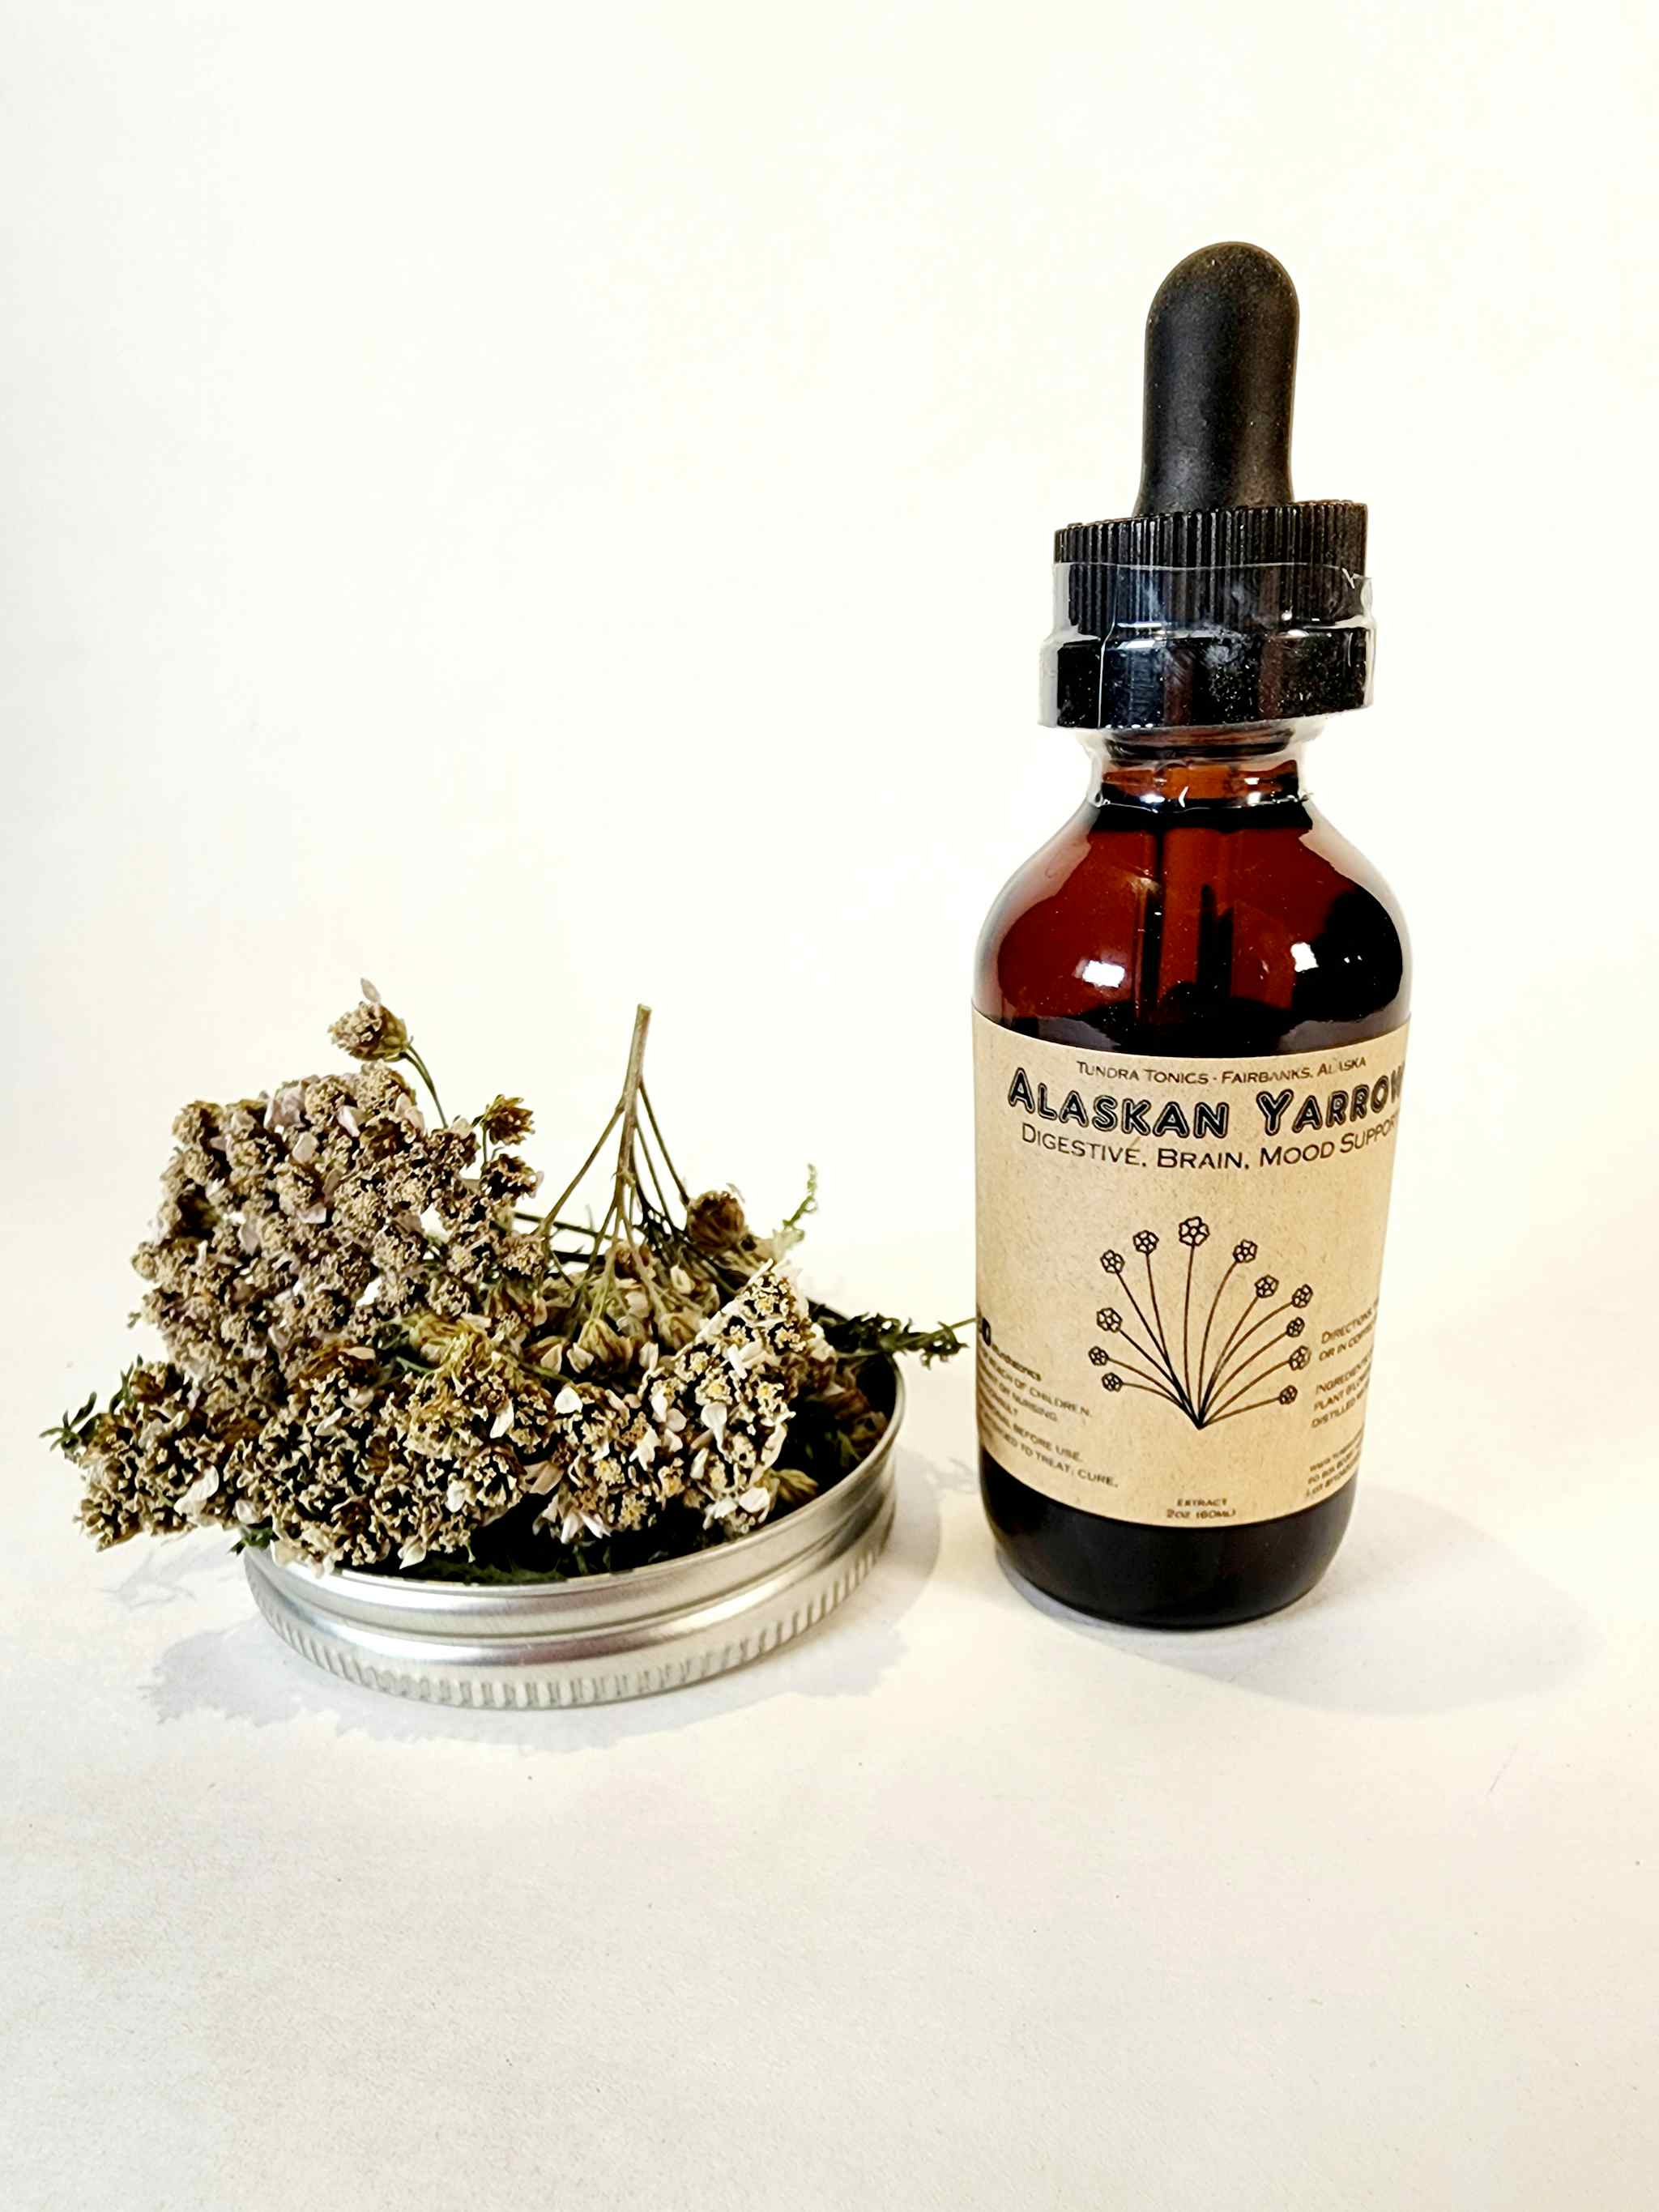 Wild Alaskan Yarrow Plant - 2oz Double Extracted Alcohol Based Medicinal Uses, Basic Properties